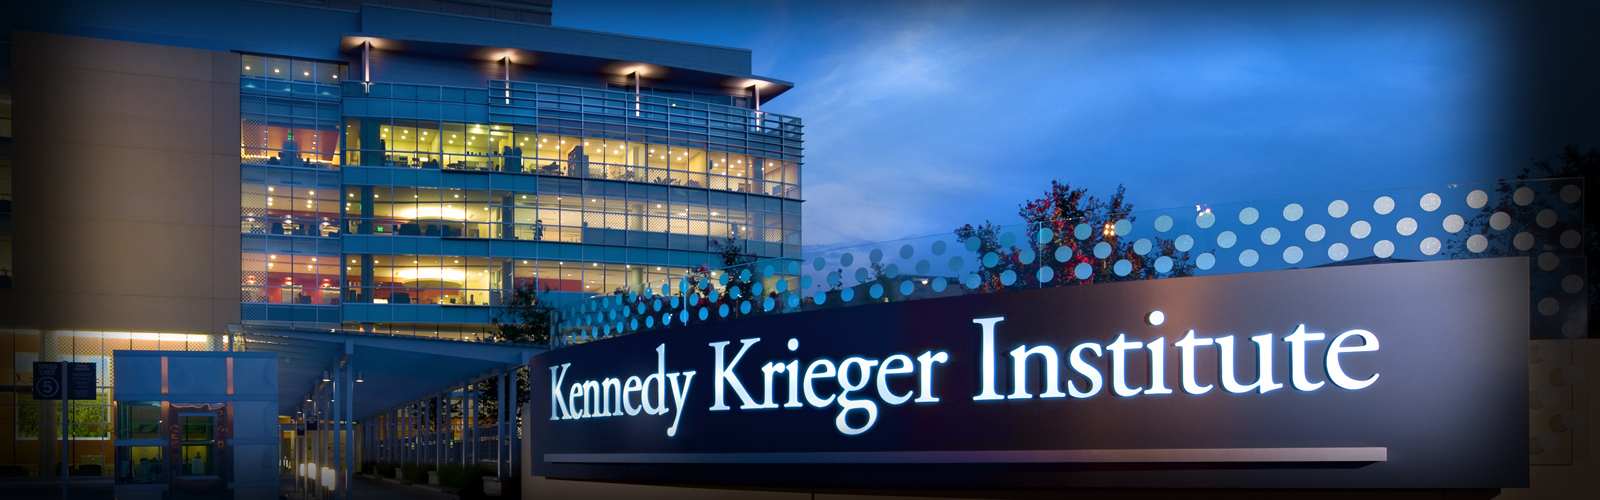 Prepare for Your Visit Kennedy Krieger Institute